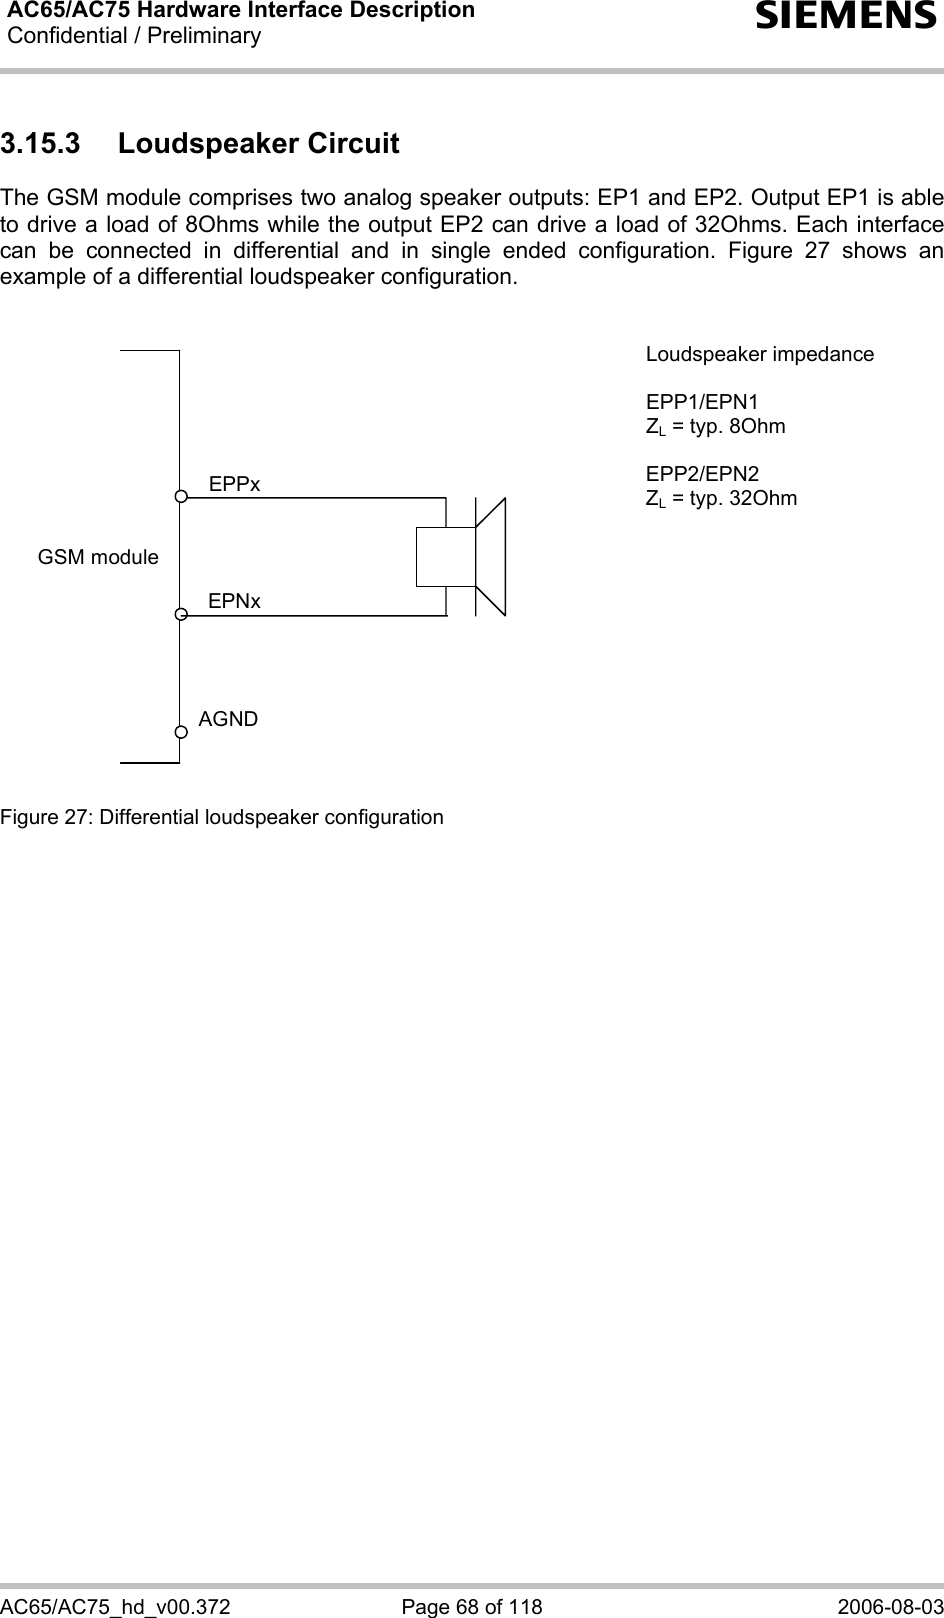 AC65/AC75 Hardware Interface Description Confidential / Preliminary   s AC65/AC75_hd_v00.372  Page 68 of 118  2006-08-03 3.15.3 Loudspeaker Circuit The GSM module comprises two analog speaker outputs: EP1 and EP2. Output EP1 is able to drive a load of 8Ohms while the output EP2 can drive a load of 32Ohms. Each interface can be connected in differential and in single ended configuration. Figure 27 shows an example of a differential loudspeaker configuration.   GSM moduleAGNDEPNxEPPx  Figure 27: Differential loudspeaker configuration Loudspeaker impedance  EPP1/EPN1 ZL = typ. 8Ohm  EPP2/EPN2 ZL = typ. 32Ohm     